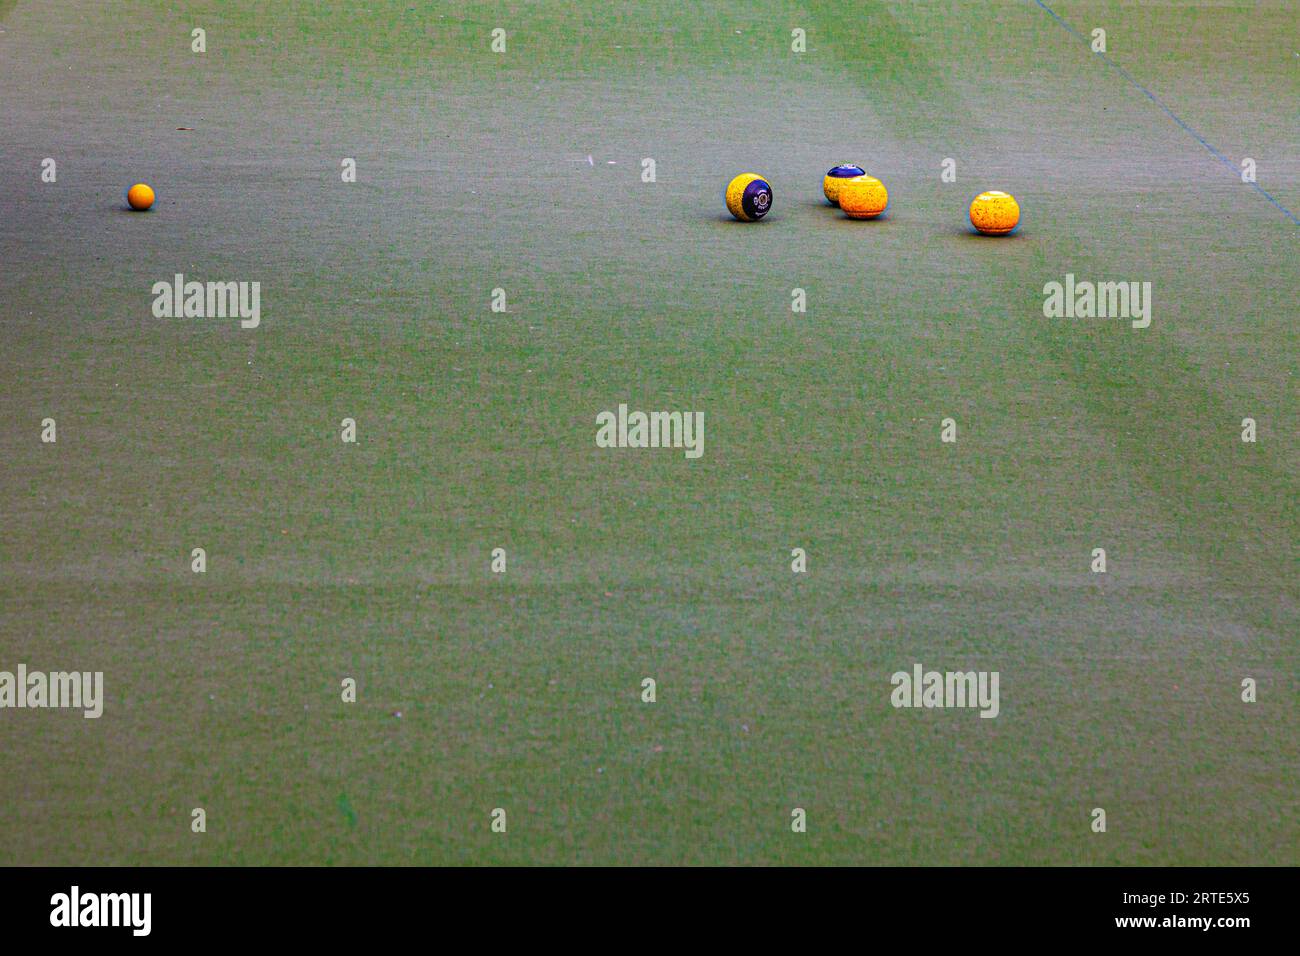 Abstract image of balls on a lawn bowling surface in Richmond British Columbia Canada Stock Photo